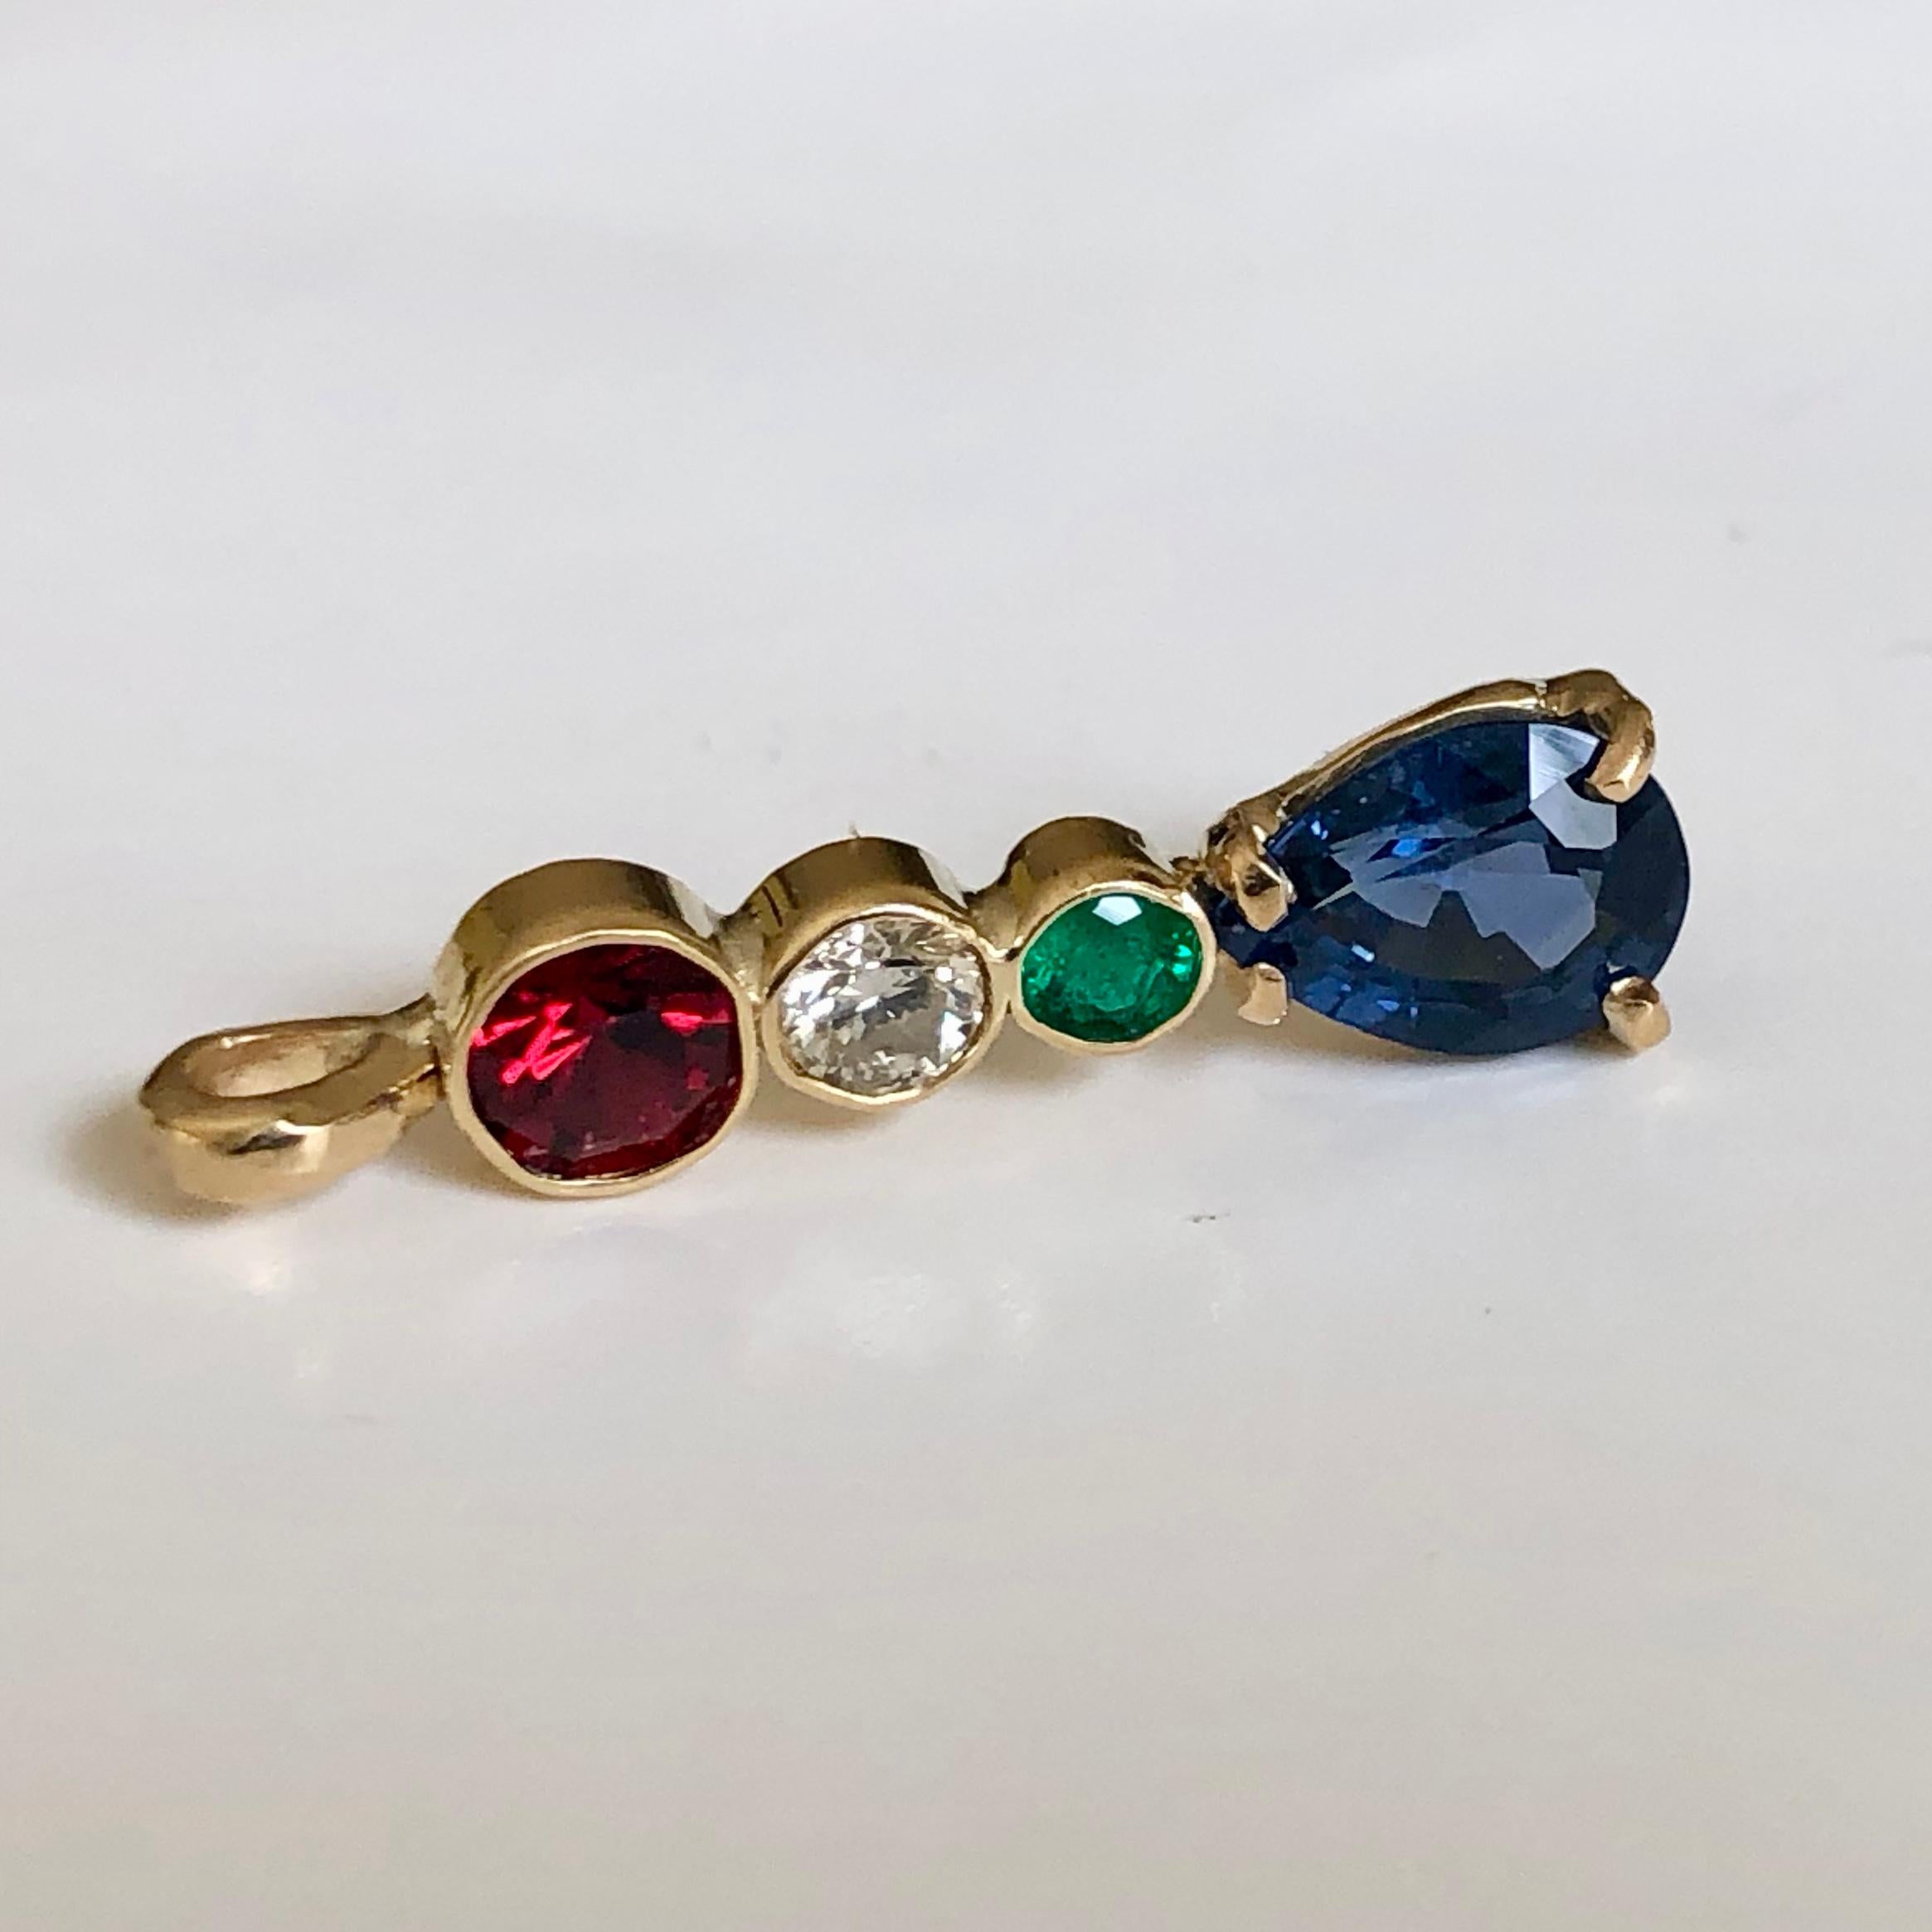 Fine 18k Yellow Gold Multi-Stone Pendant
Very unique pendant set with 1.45ct blue sapphire pear cut, .40ct red spinel round cut, .12ct diamond round cut, and .10ct emerald round cut. Totaling 2.10 carat gemstone.
Pendant Length: 1 Inches
Style: